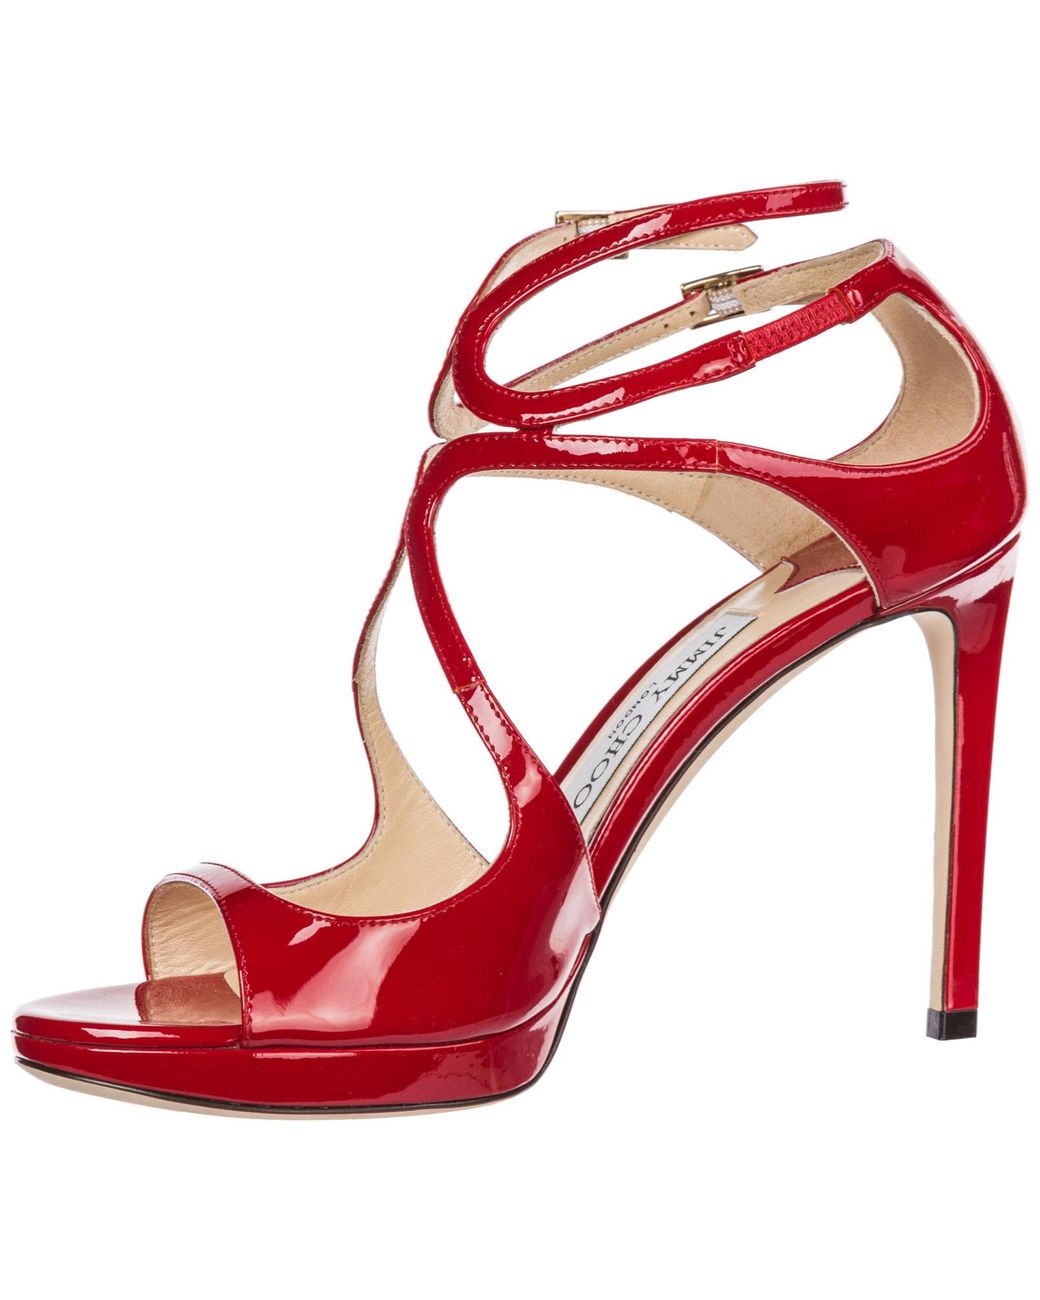 Jimmy Choo Leather Lang Patent Strappy Sandal in Red (Black 